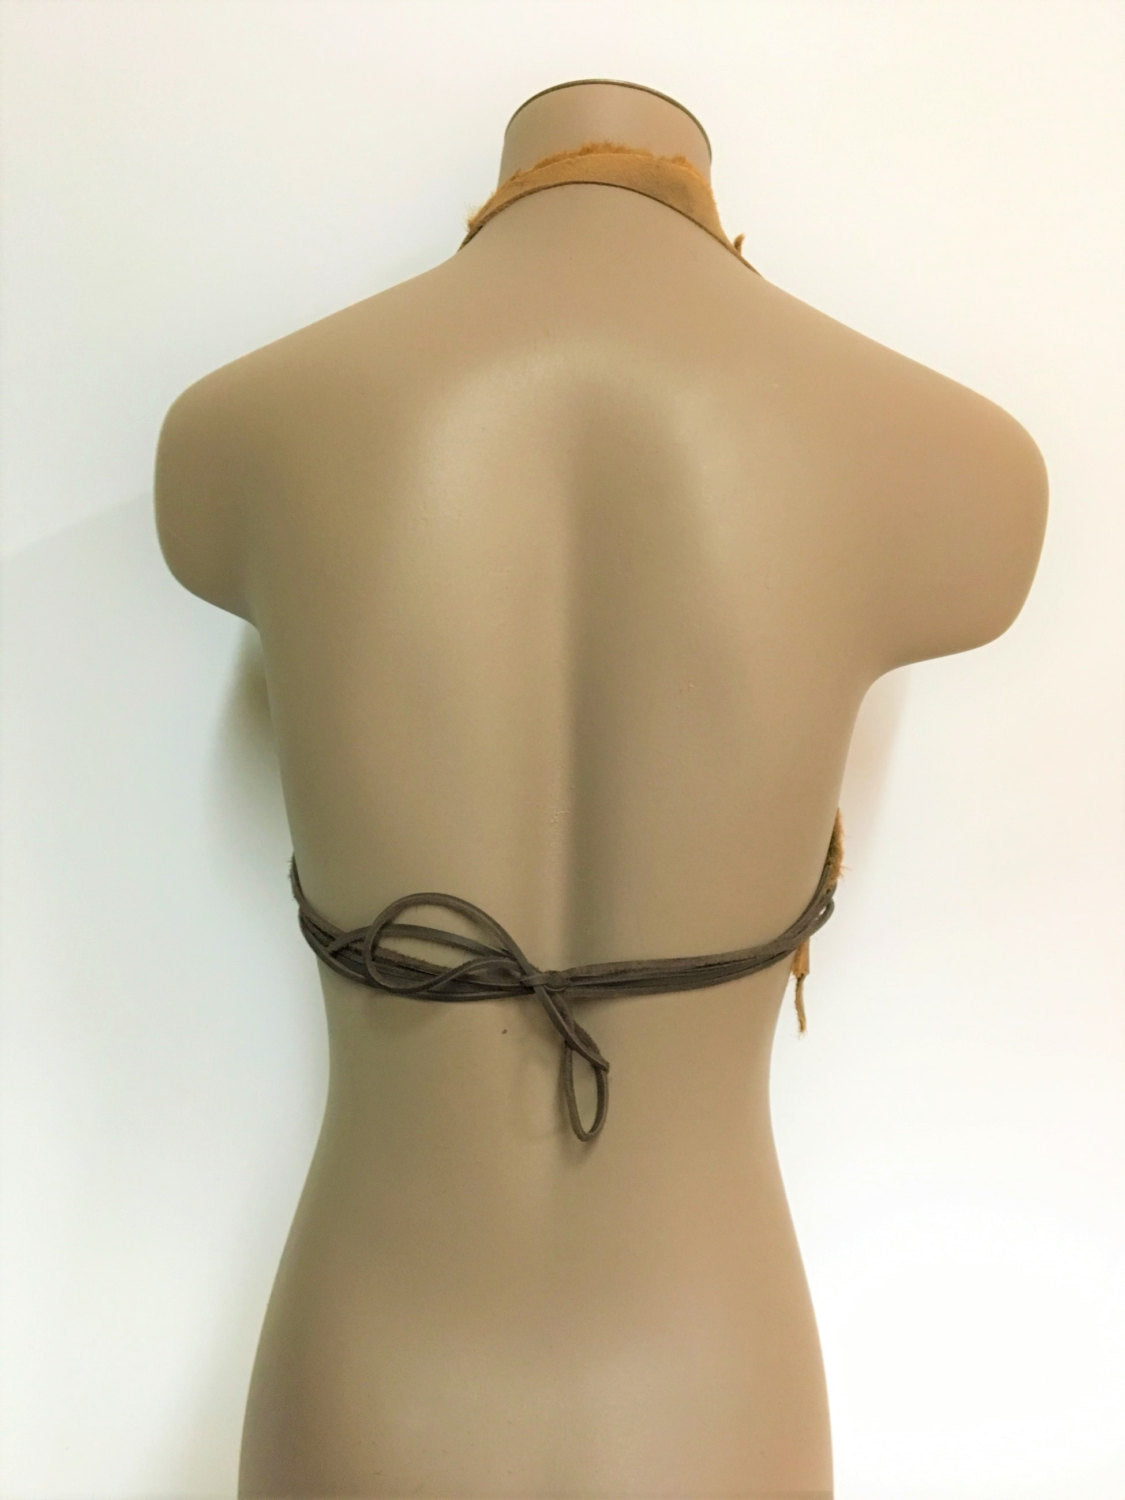 Torn Leather Top - burningbabeclothingco